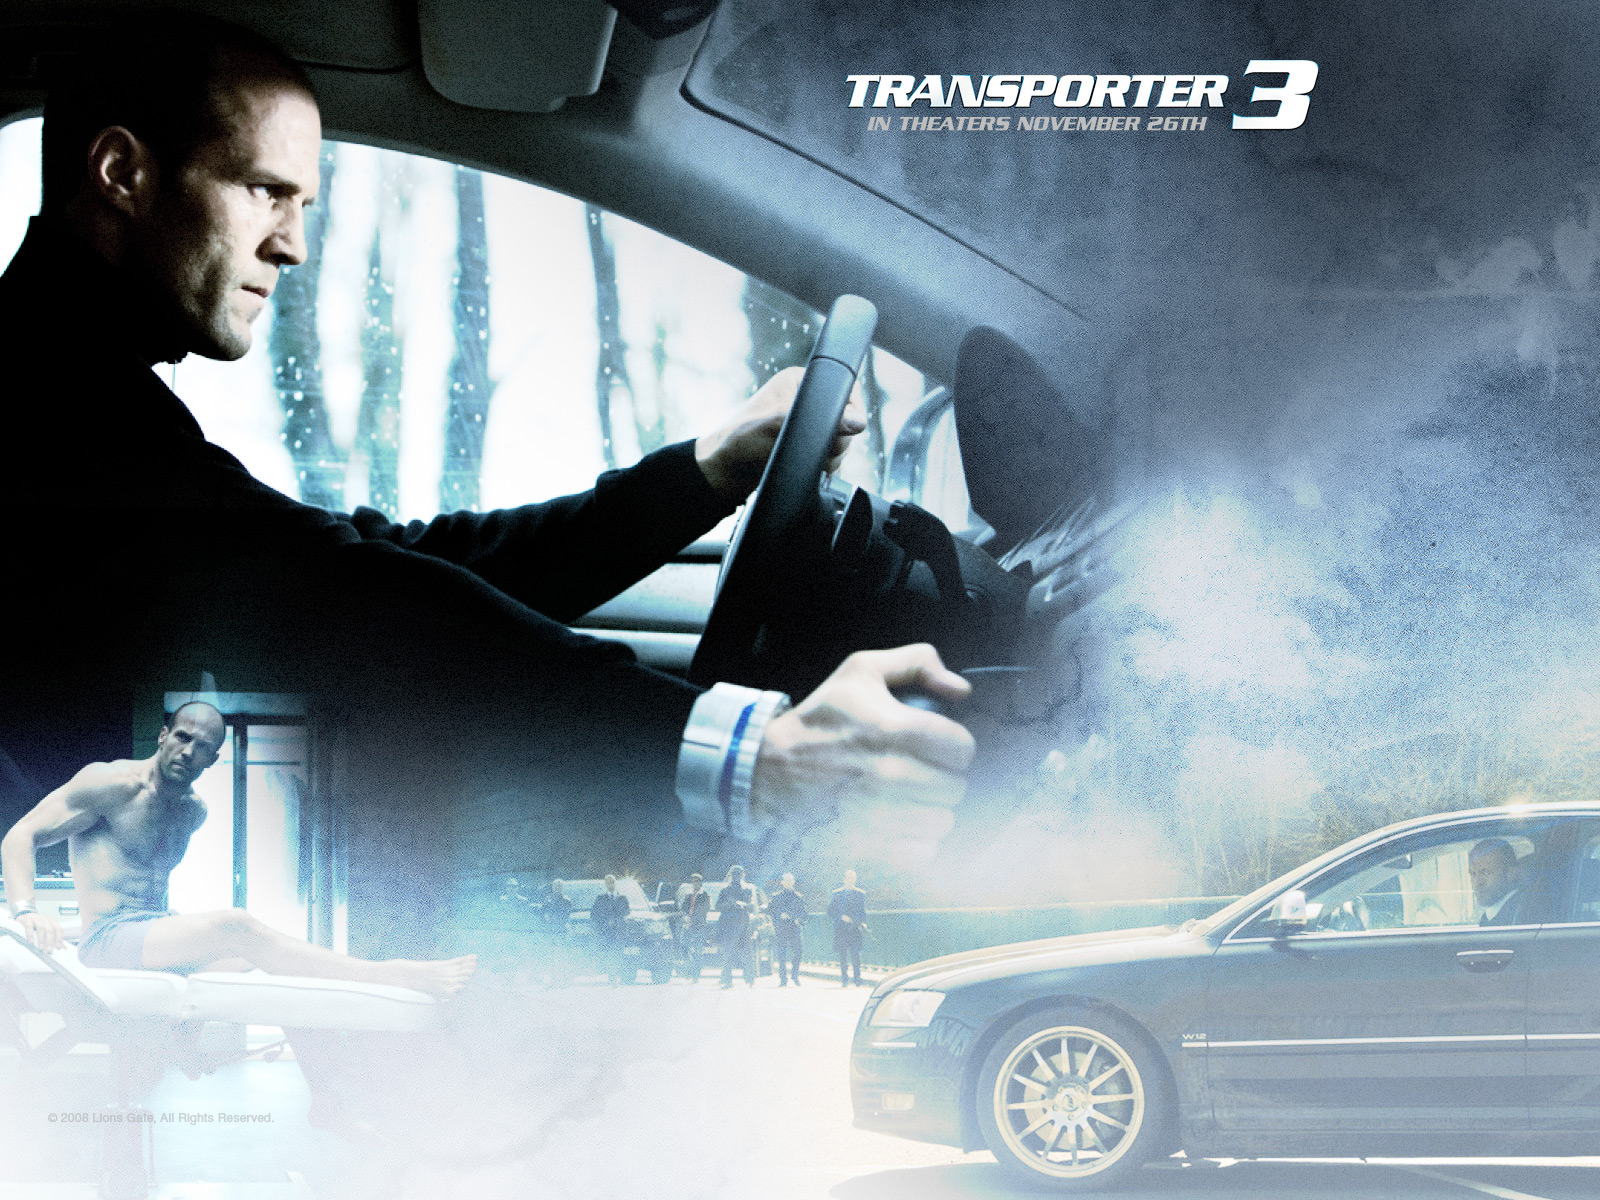 Download High quality Transporter 3 wallpaper / Movies / 1600x1200